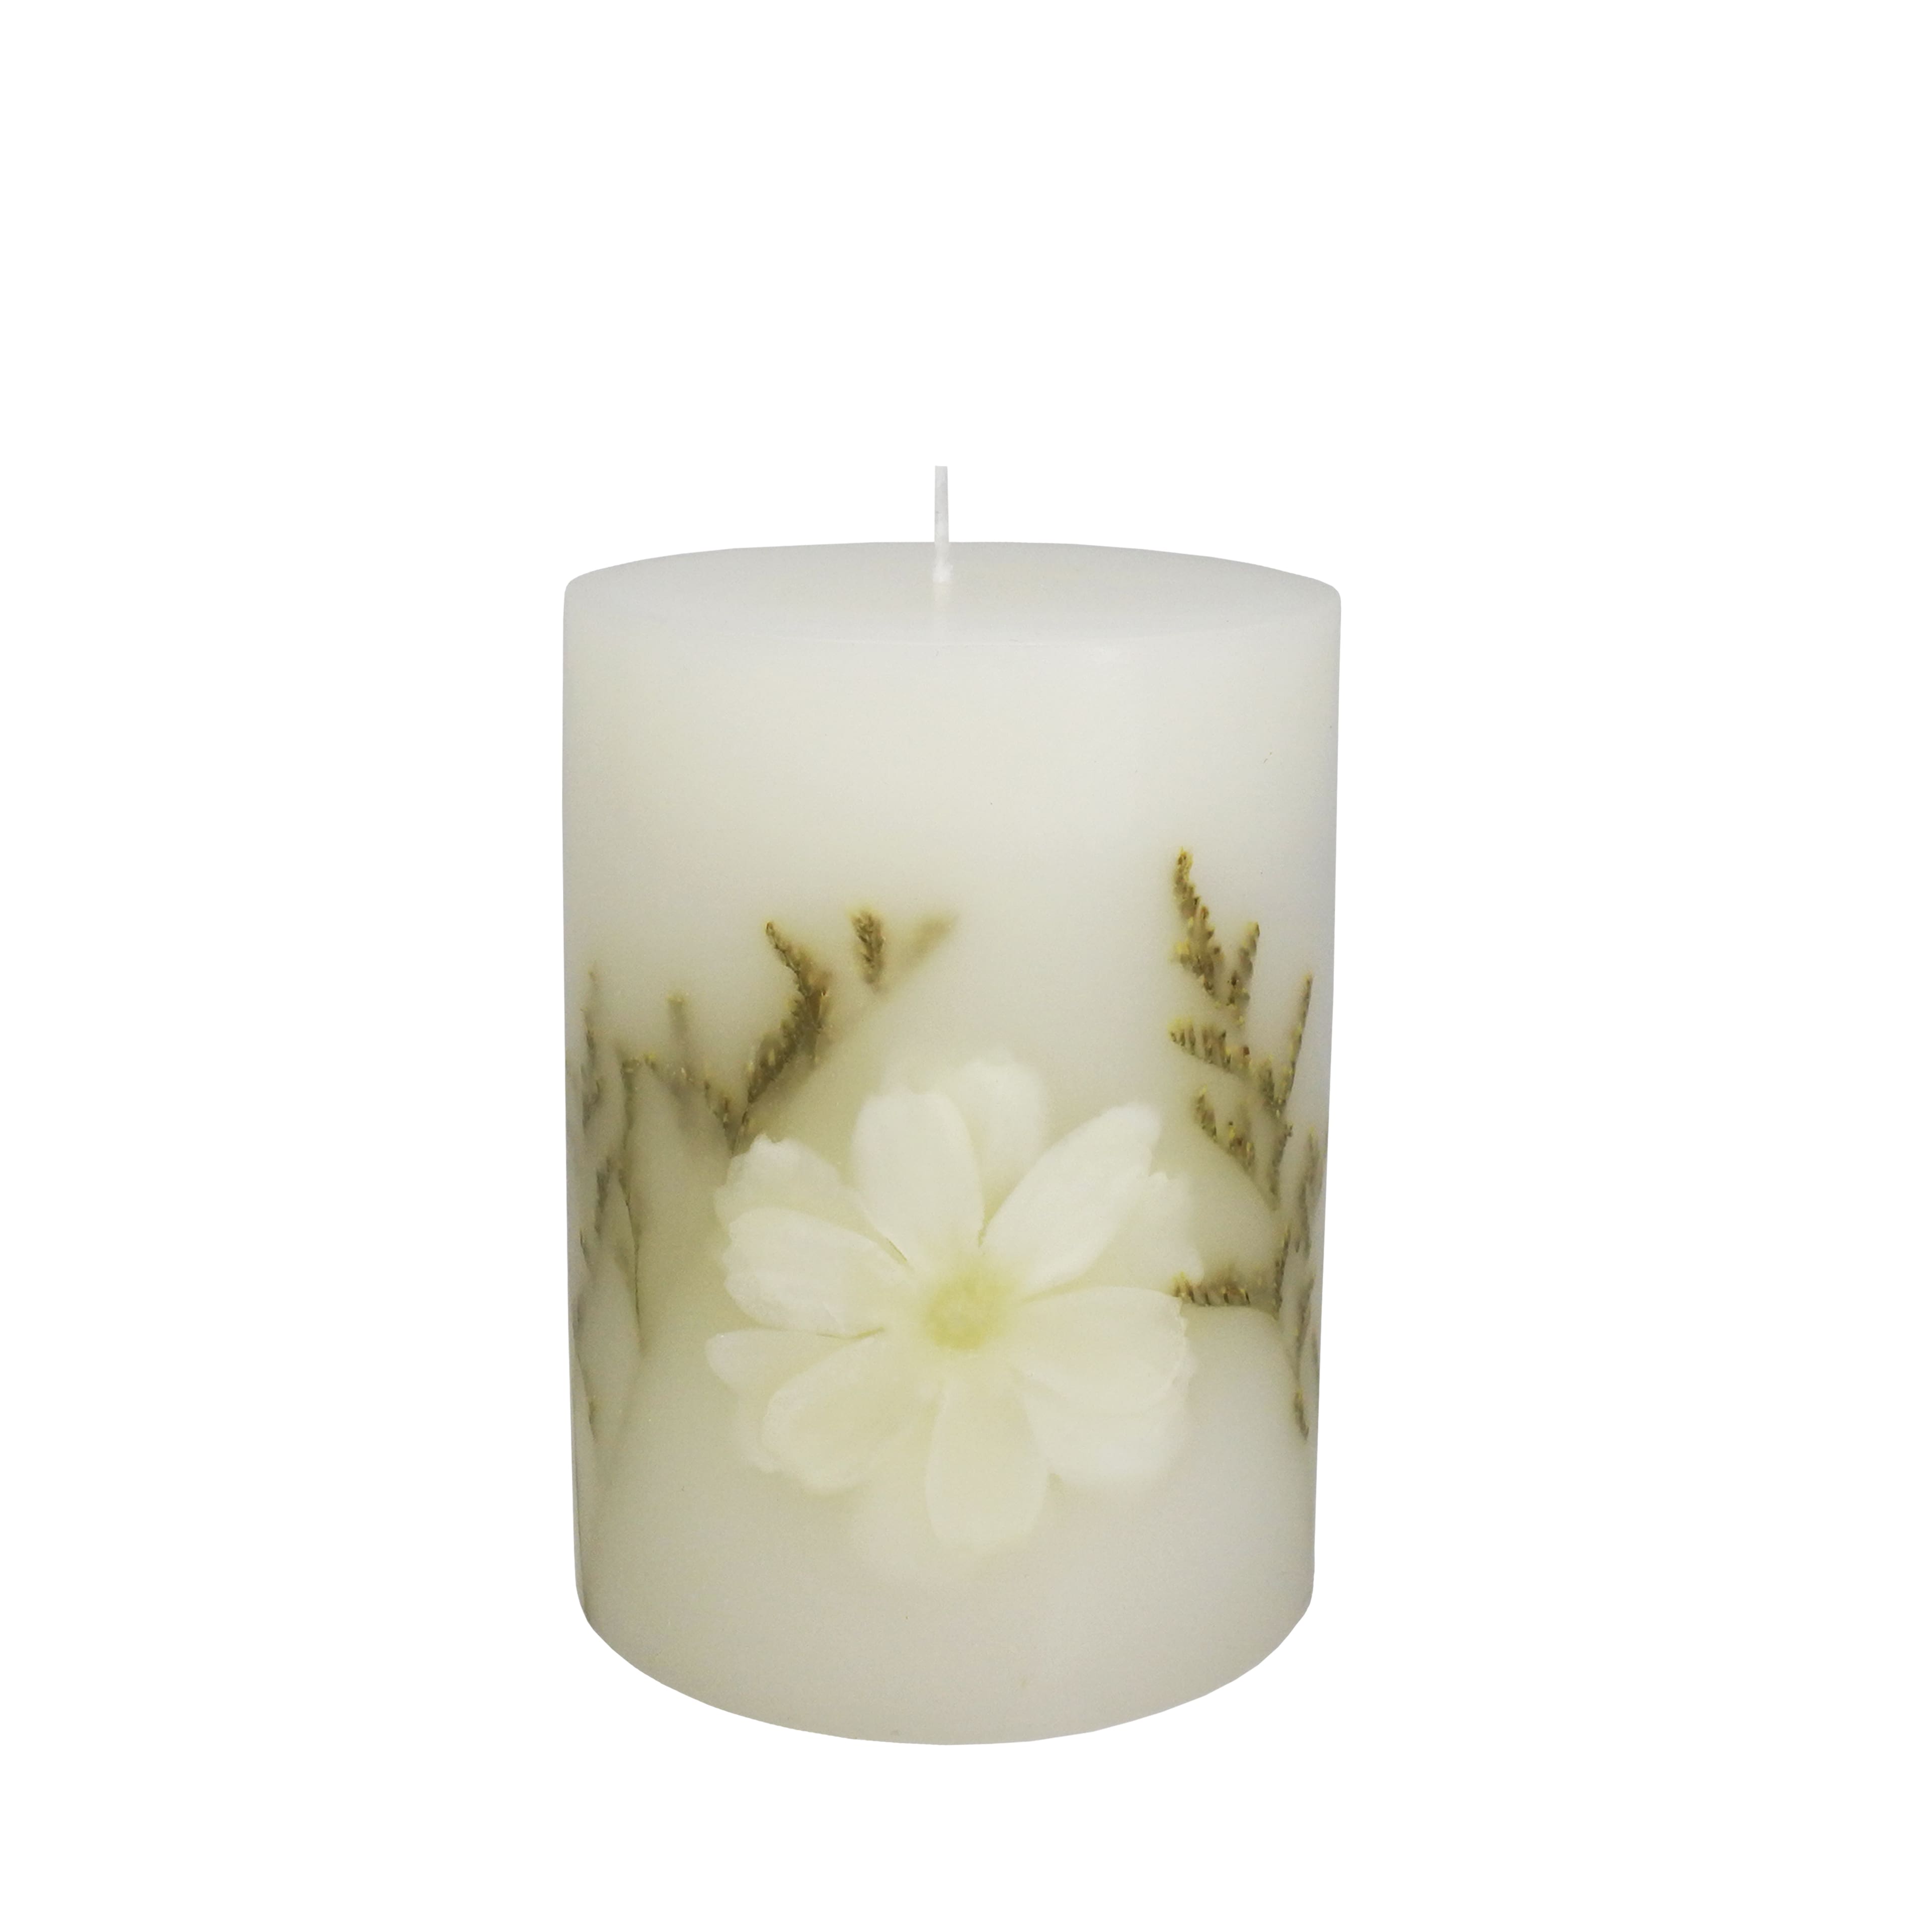 Scented Fragranced Home Decor Pillar Candles Choose from 4 Scents 